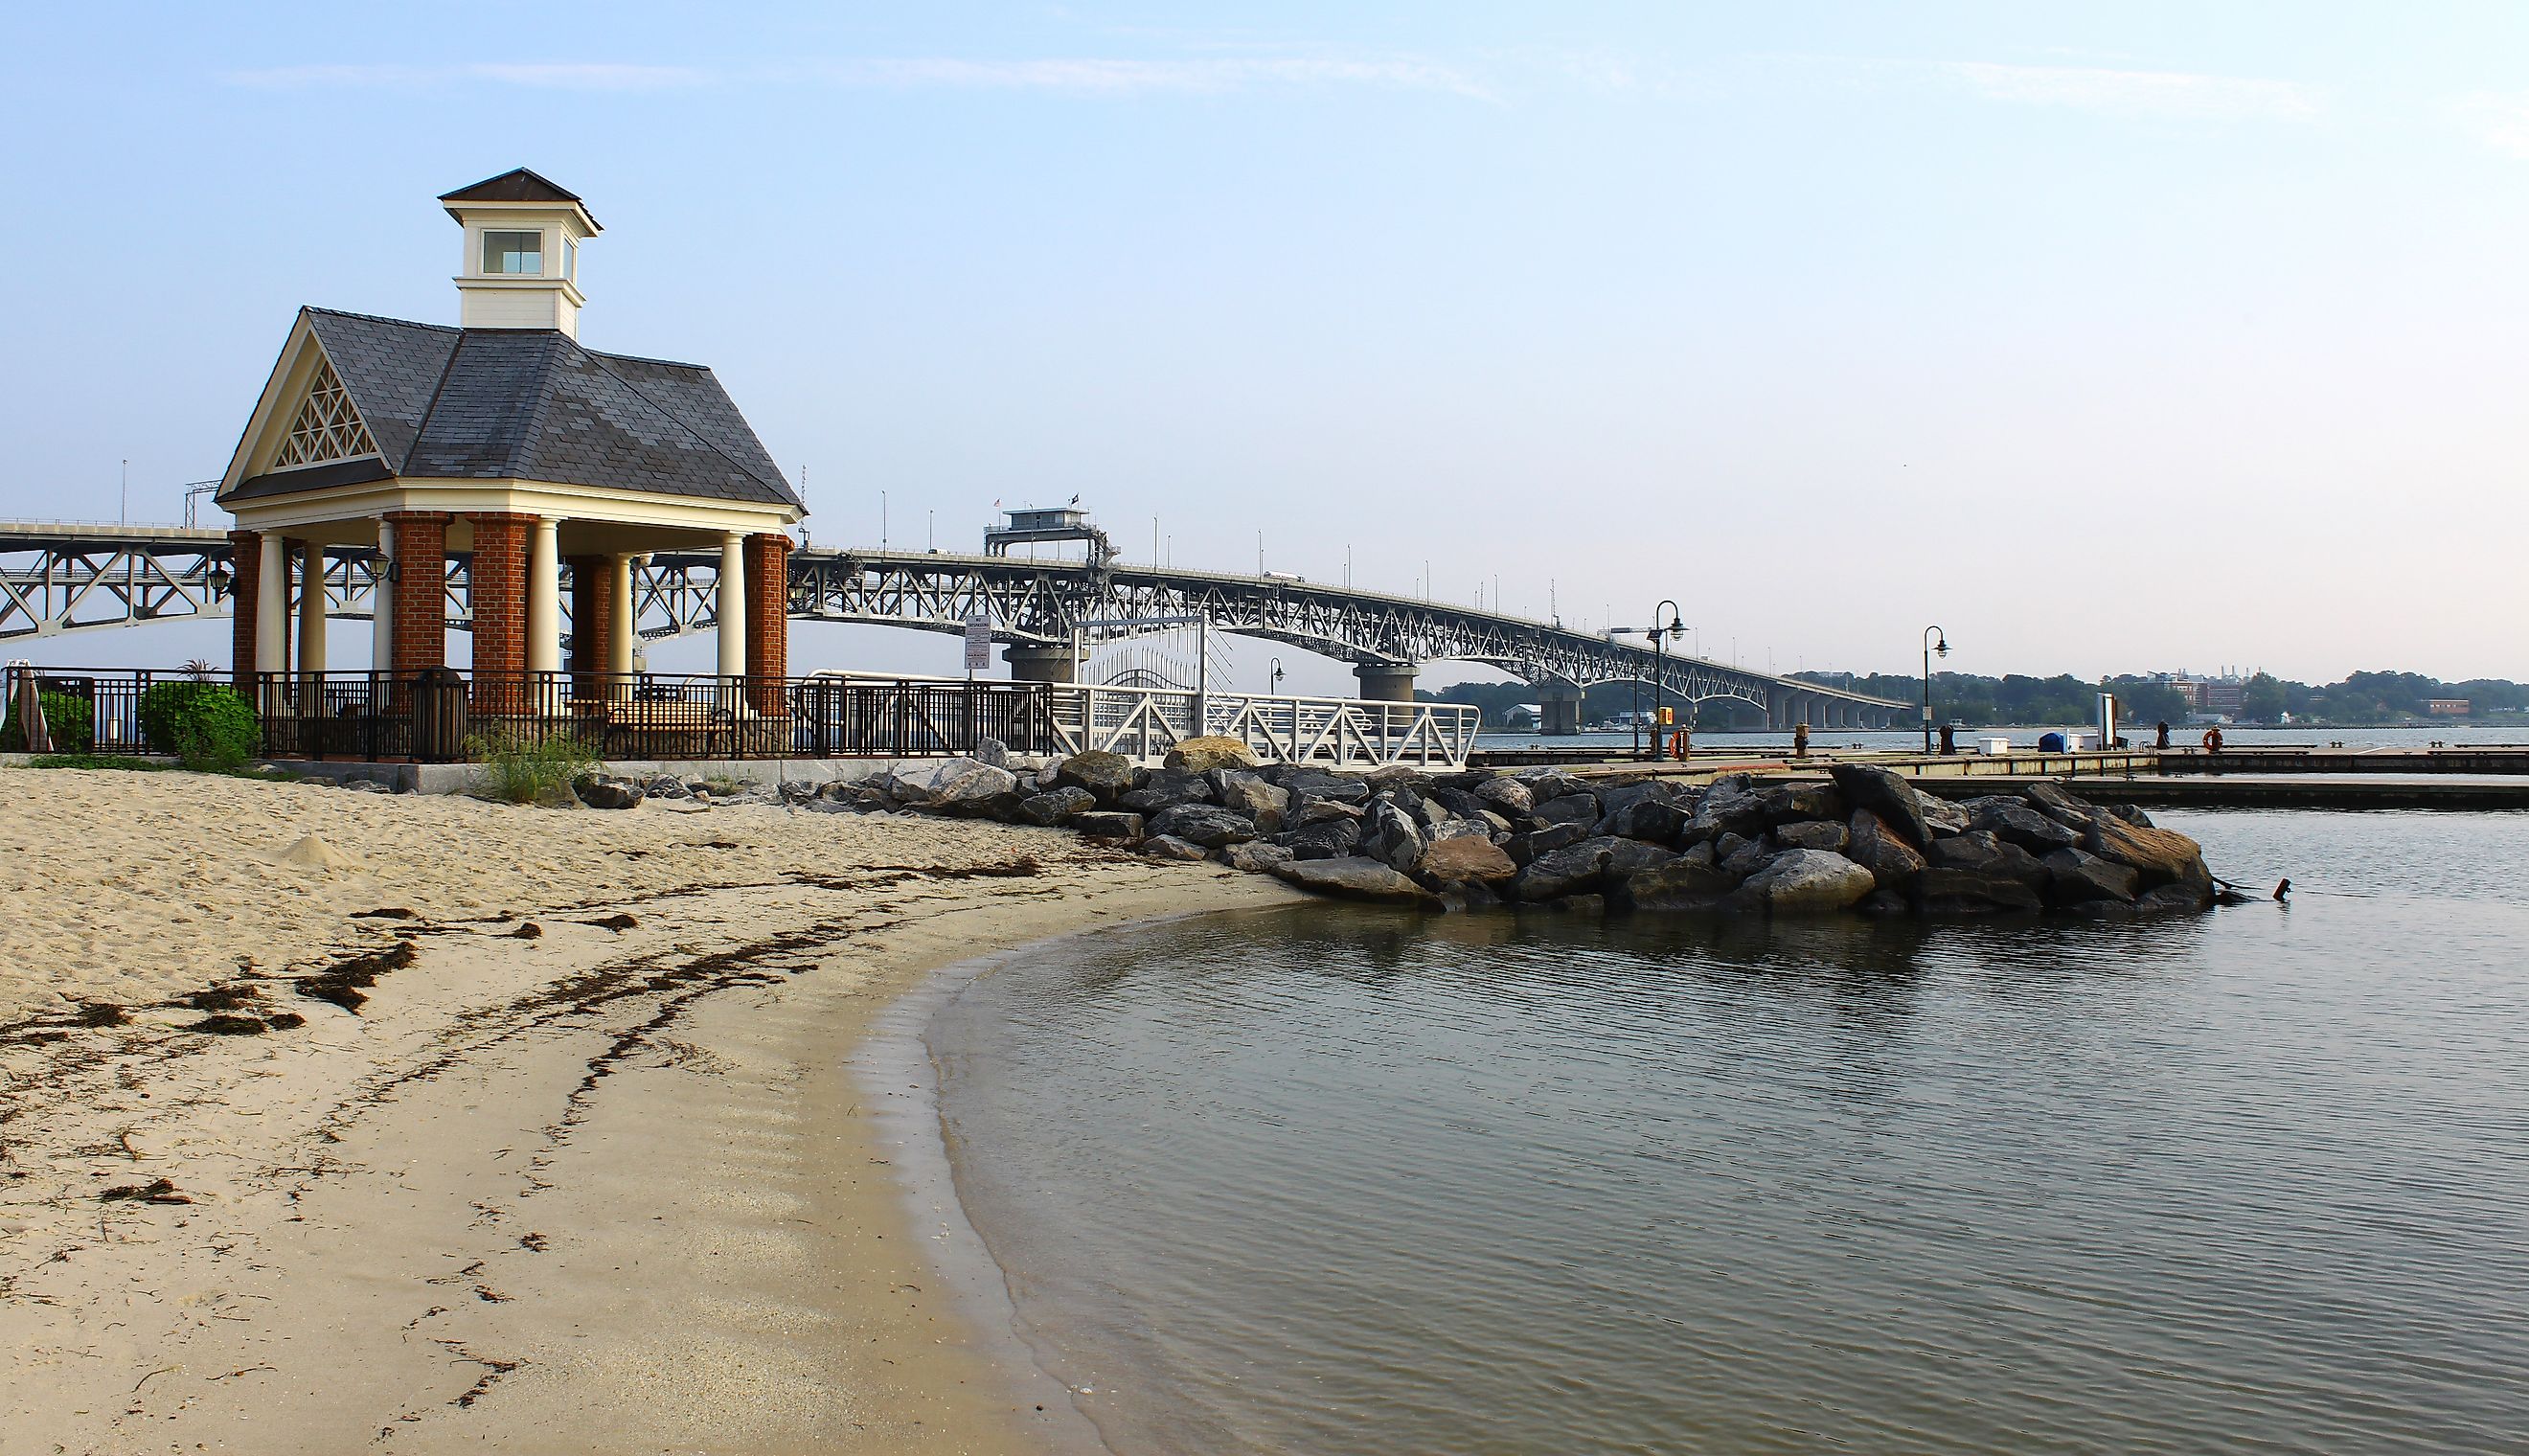 The Yorktown beach and waterfront with the Coleman bridge and a small gazebo